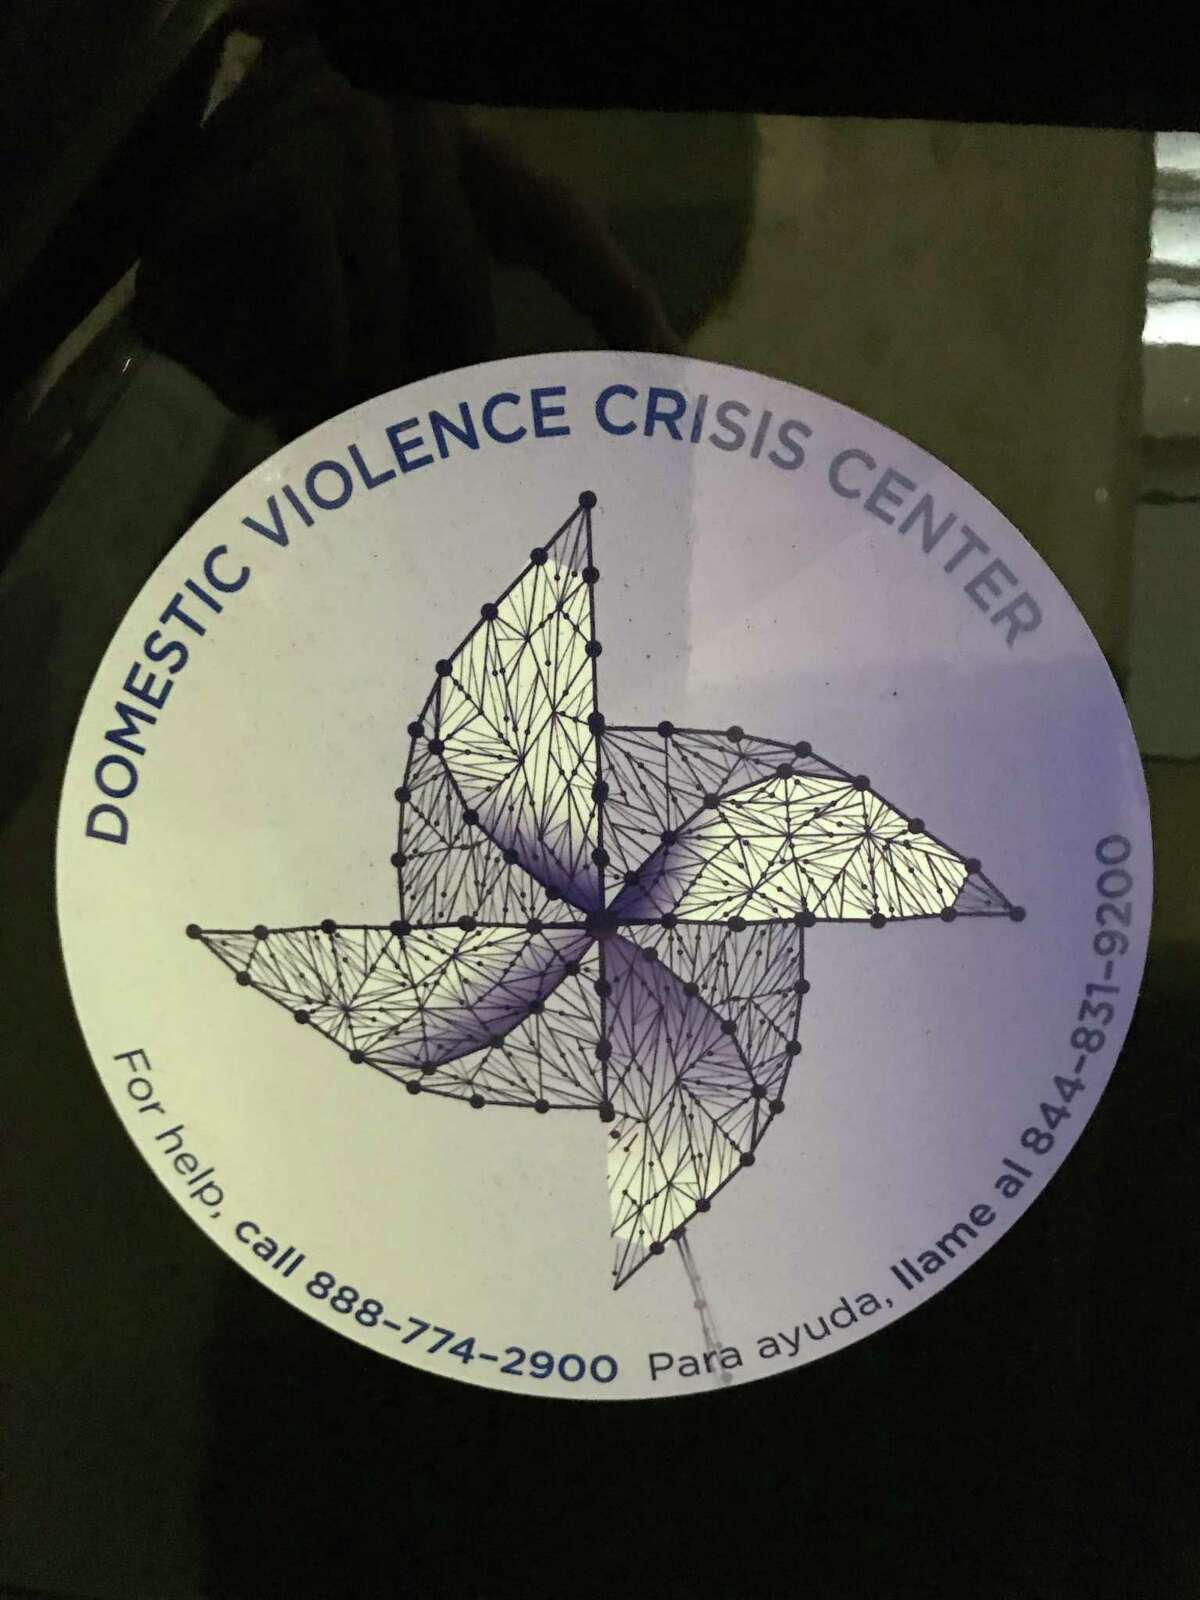 Stamford Police are showing their support for Domestic Violence Awareness Month by outfitting their cruisers with magnets advertising contact numbers for the Domestic Violence Crisis Center on Summer Street.